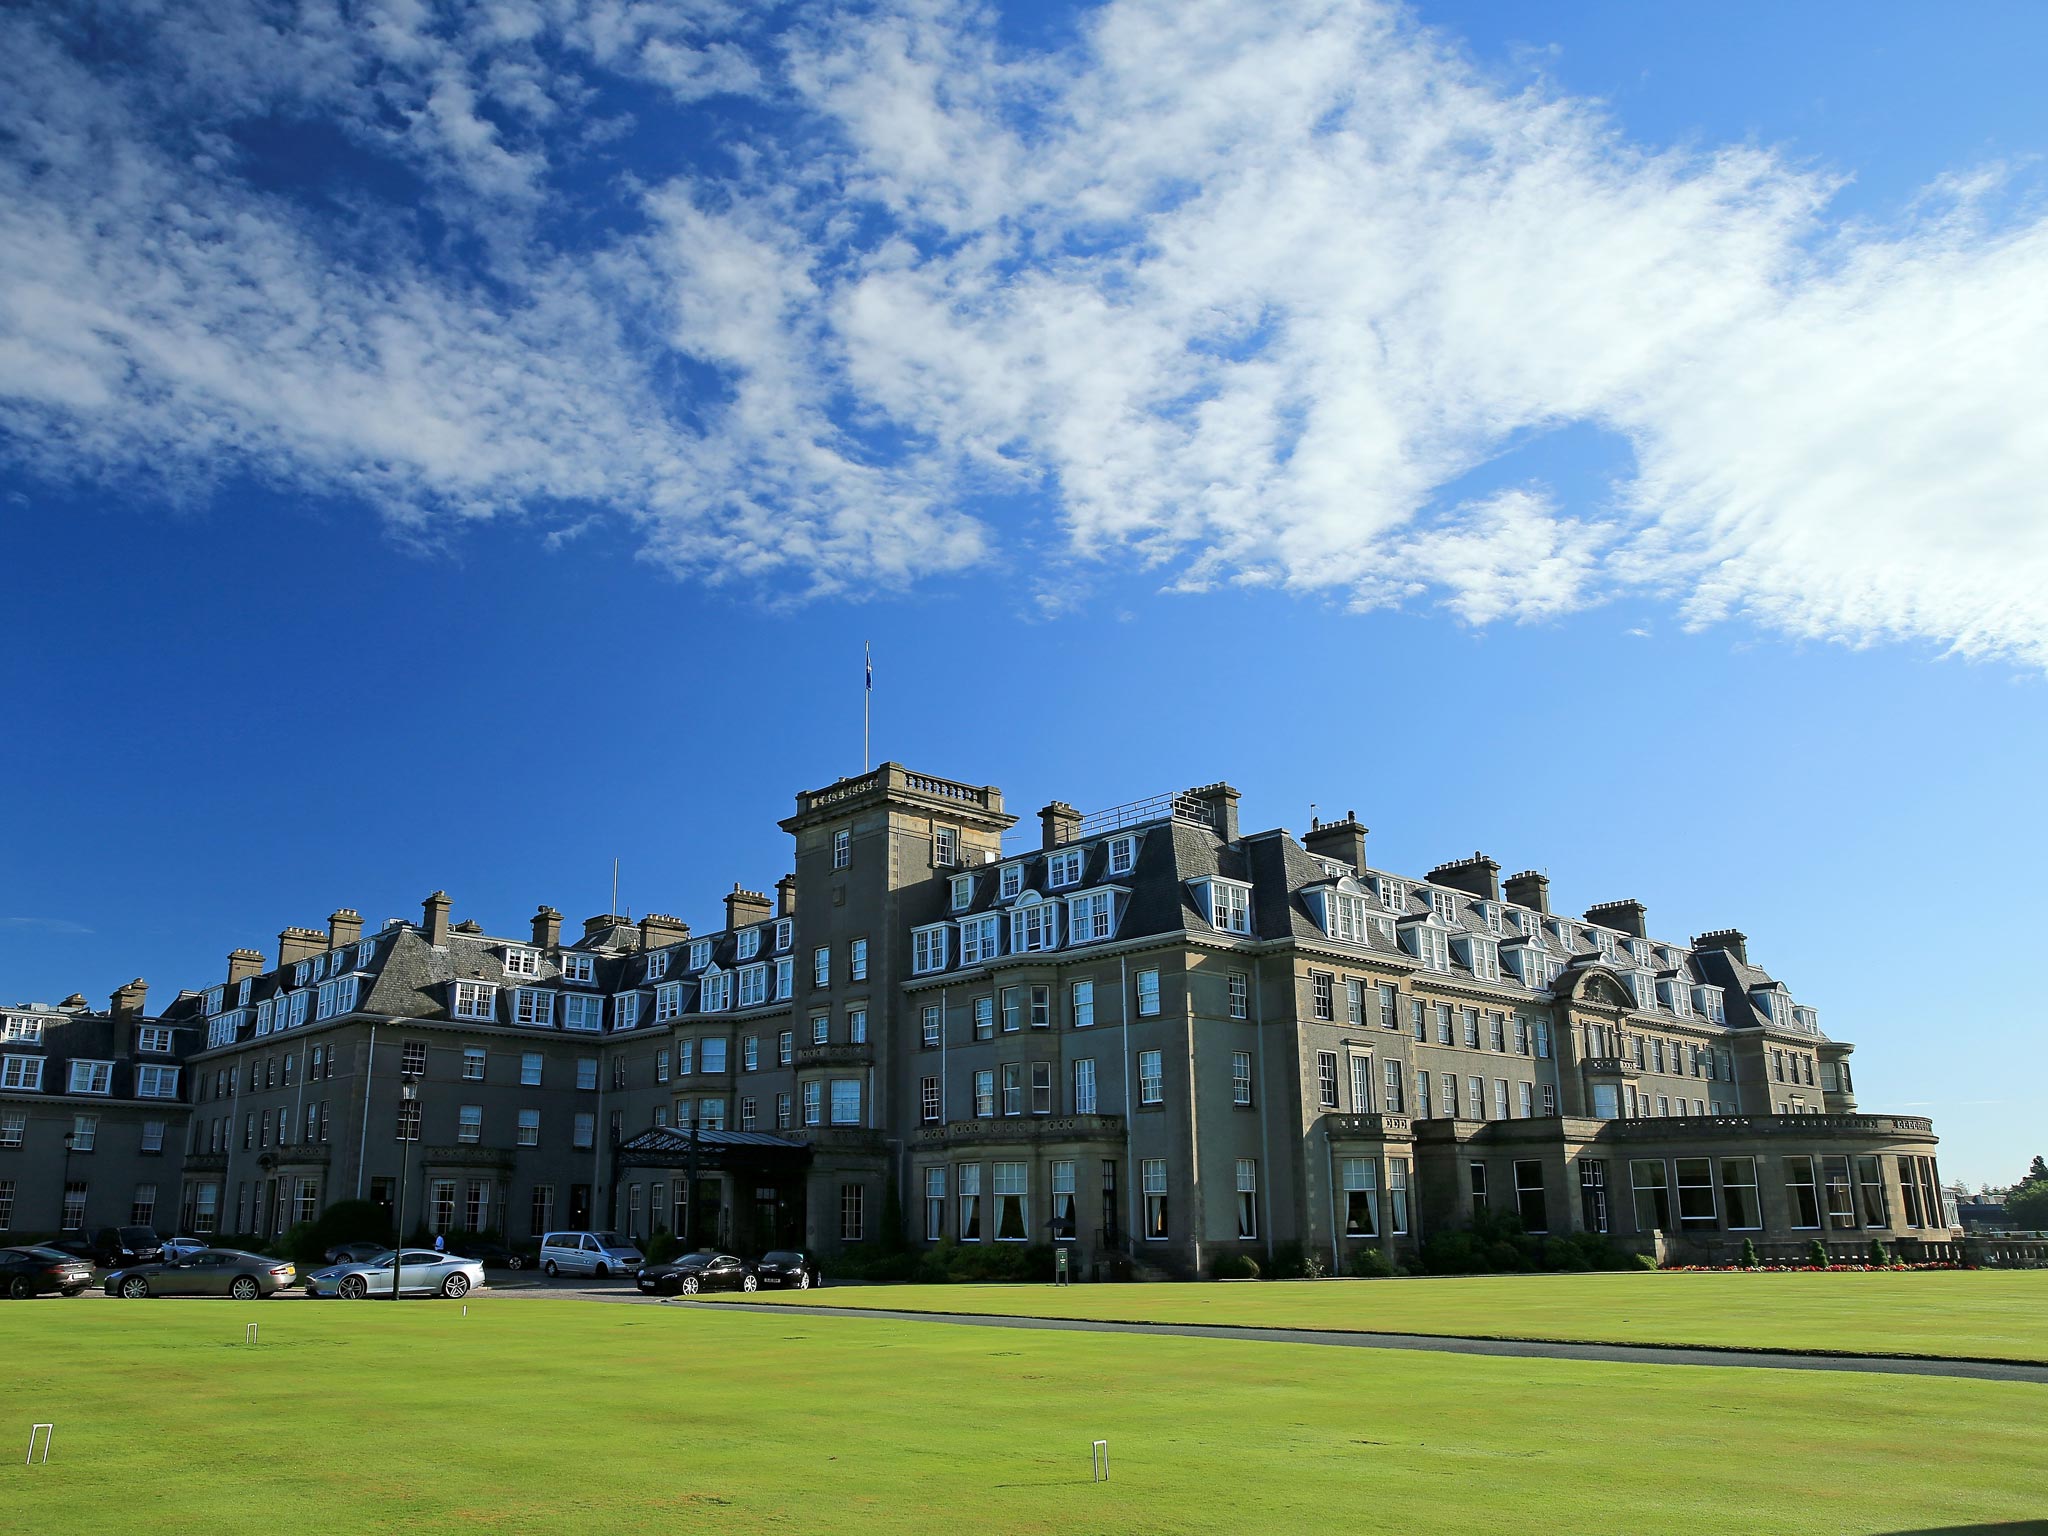 Gleneagles Hotel in Perthshire, the venue of the
JPMorgan pensions conference attended by David
Willetts